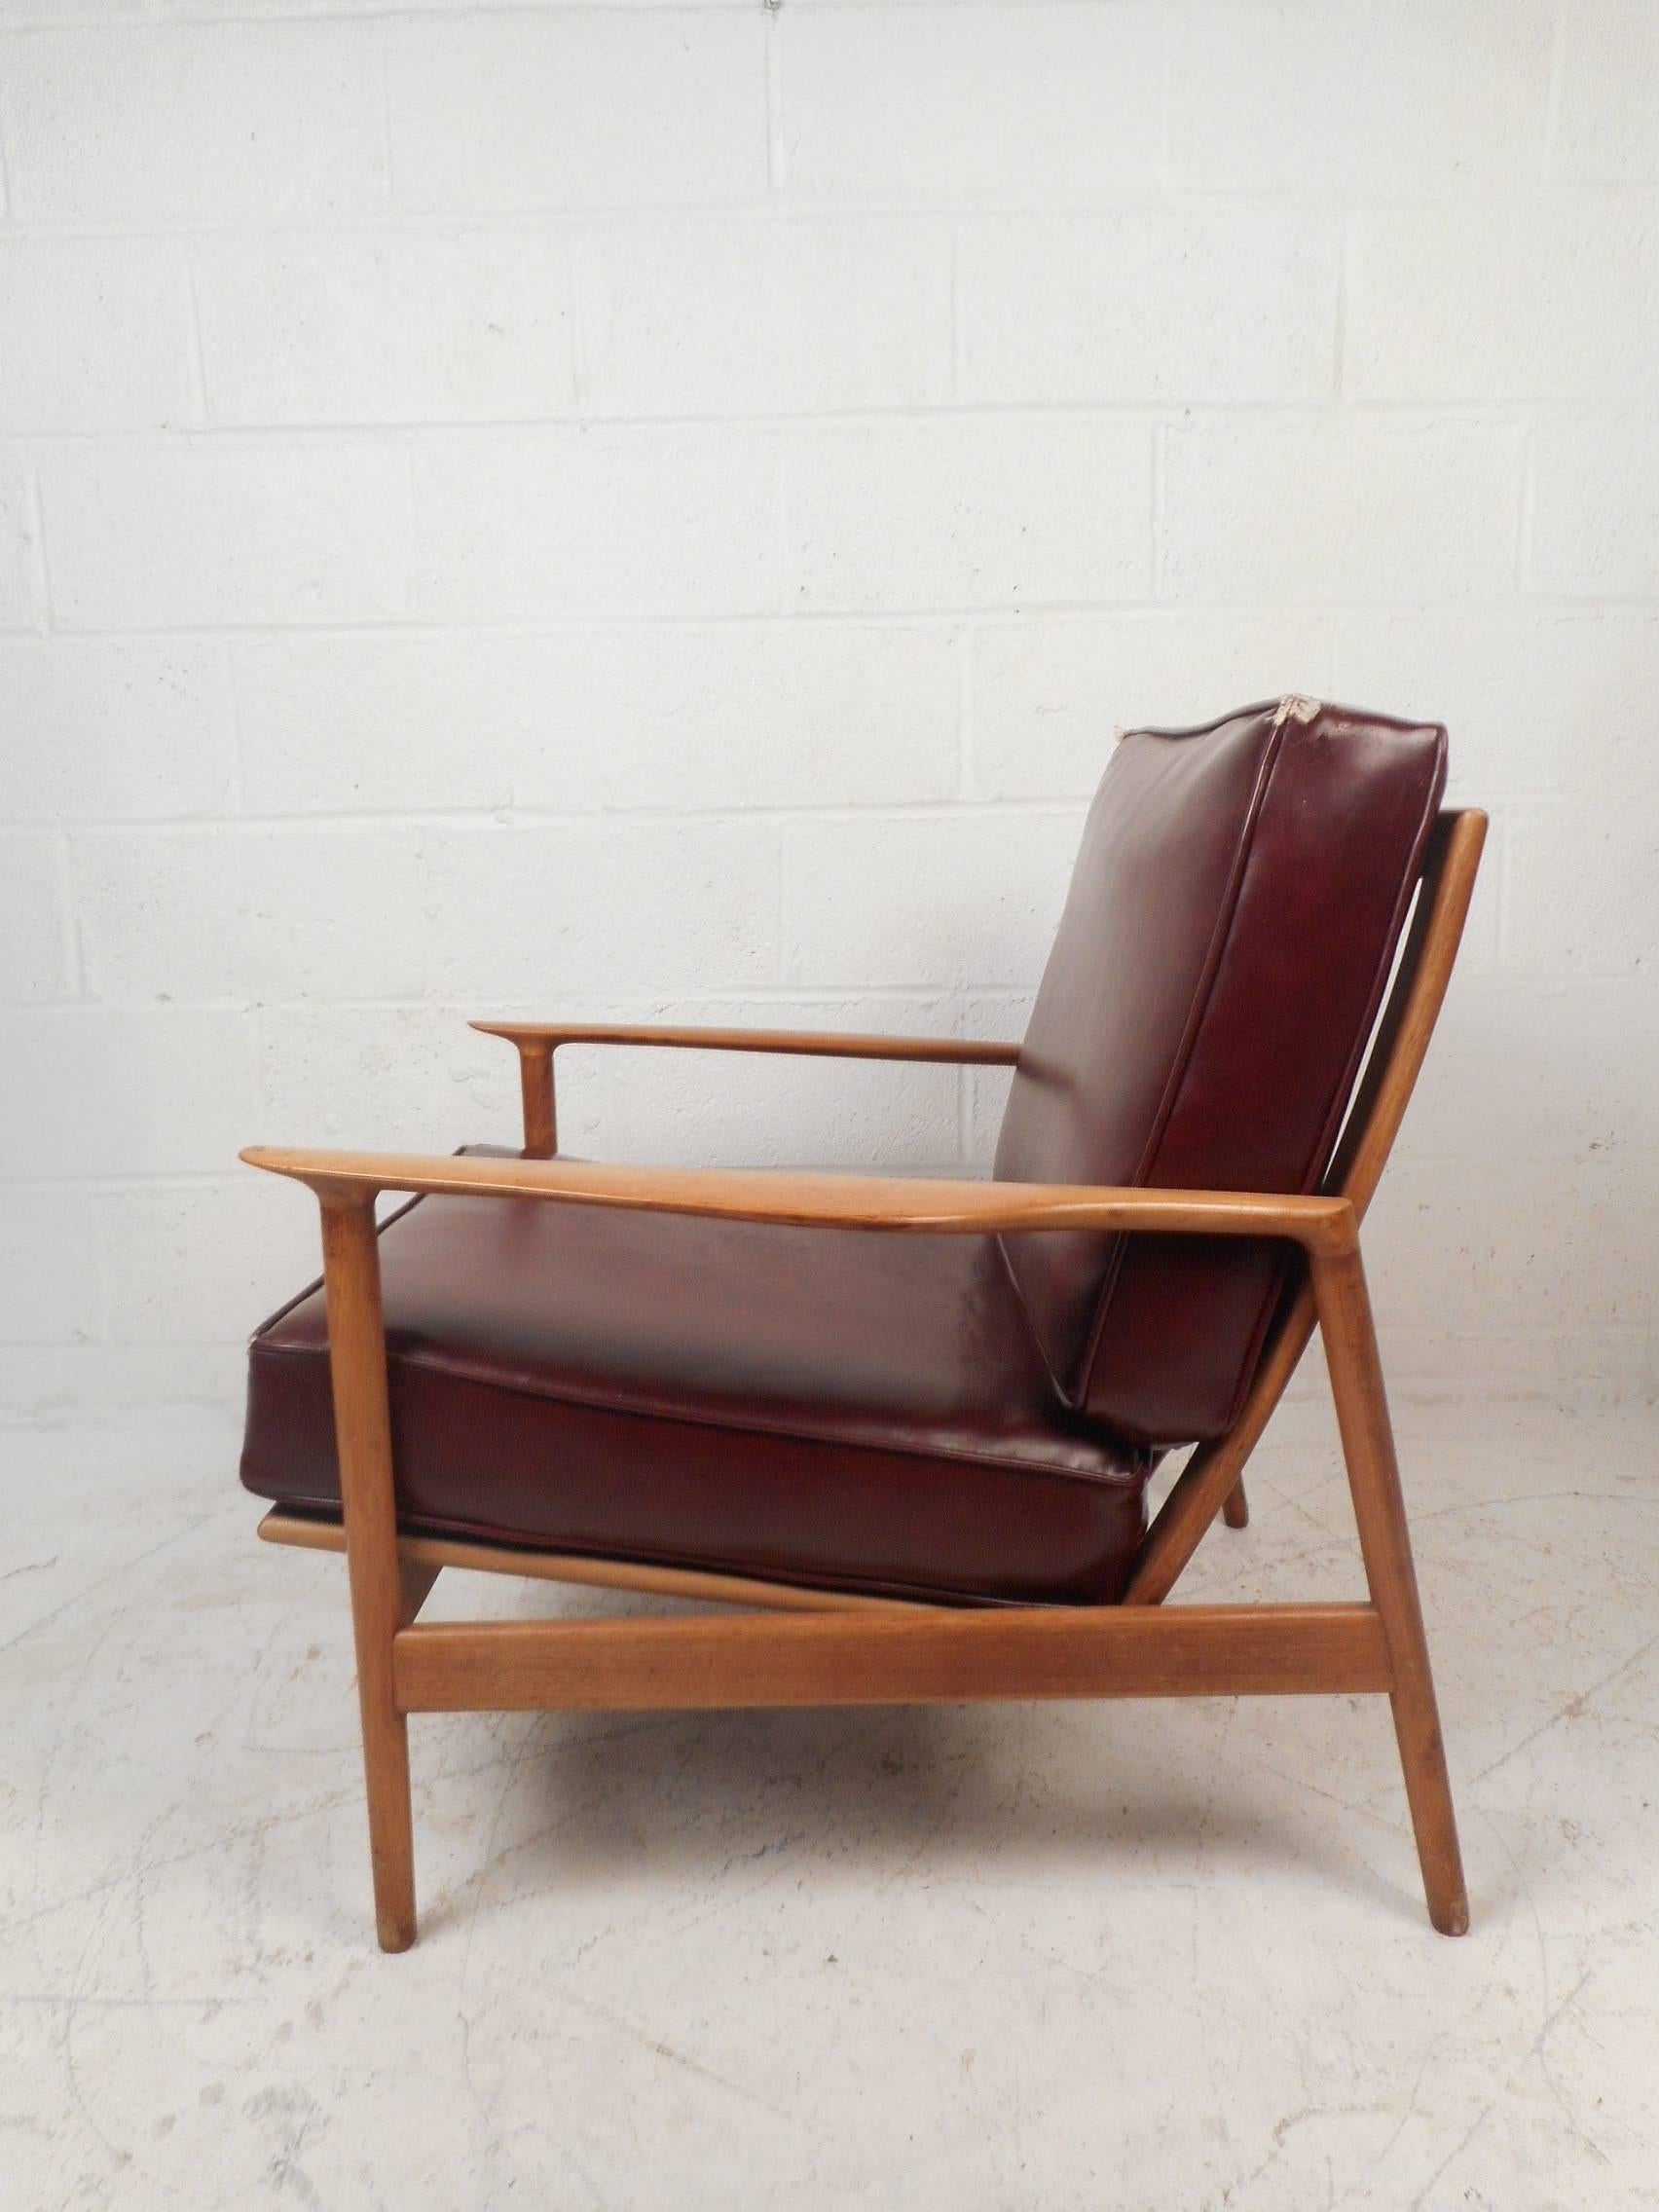 This gorgeous vintage modern lounge chair features a sculpted teak frame with thick padded vinyl cushions. Quality craftsmanship with angled legs, sculpted arm rests, and a unique carved slatted backrest. The thick padded cushions and angled design